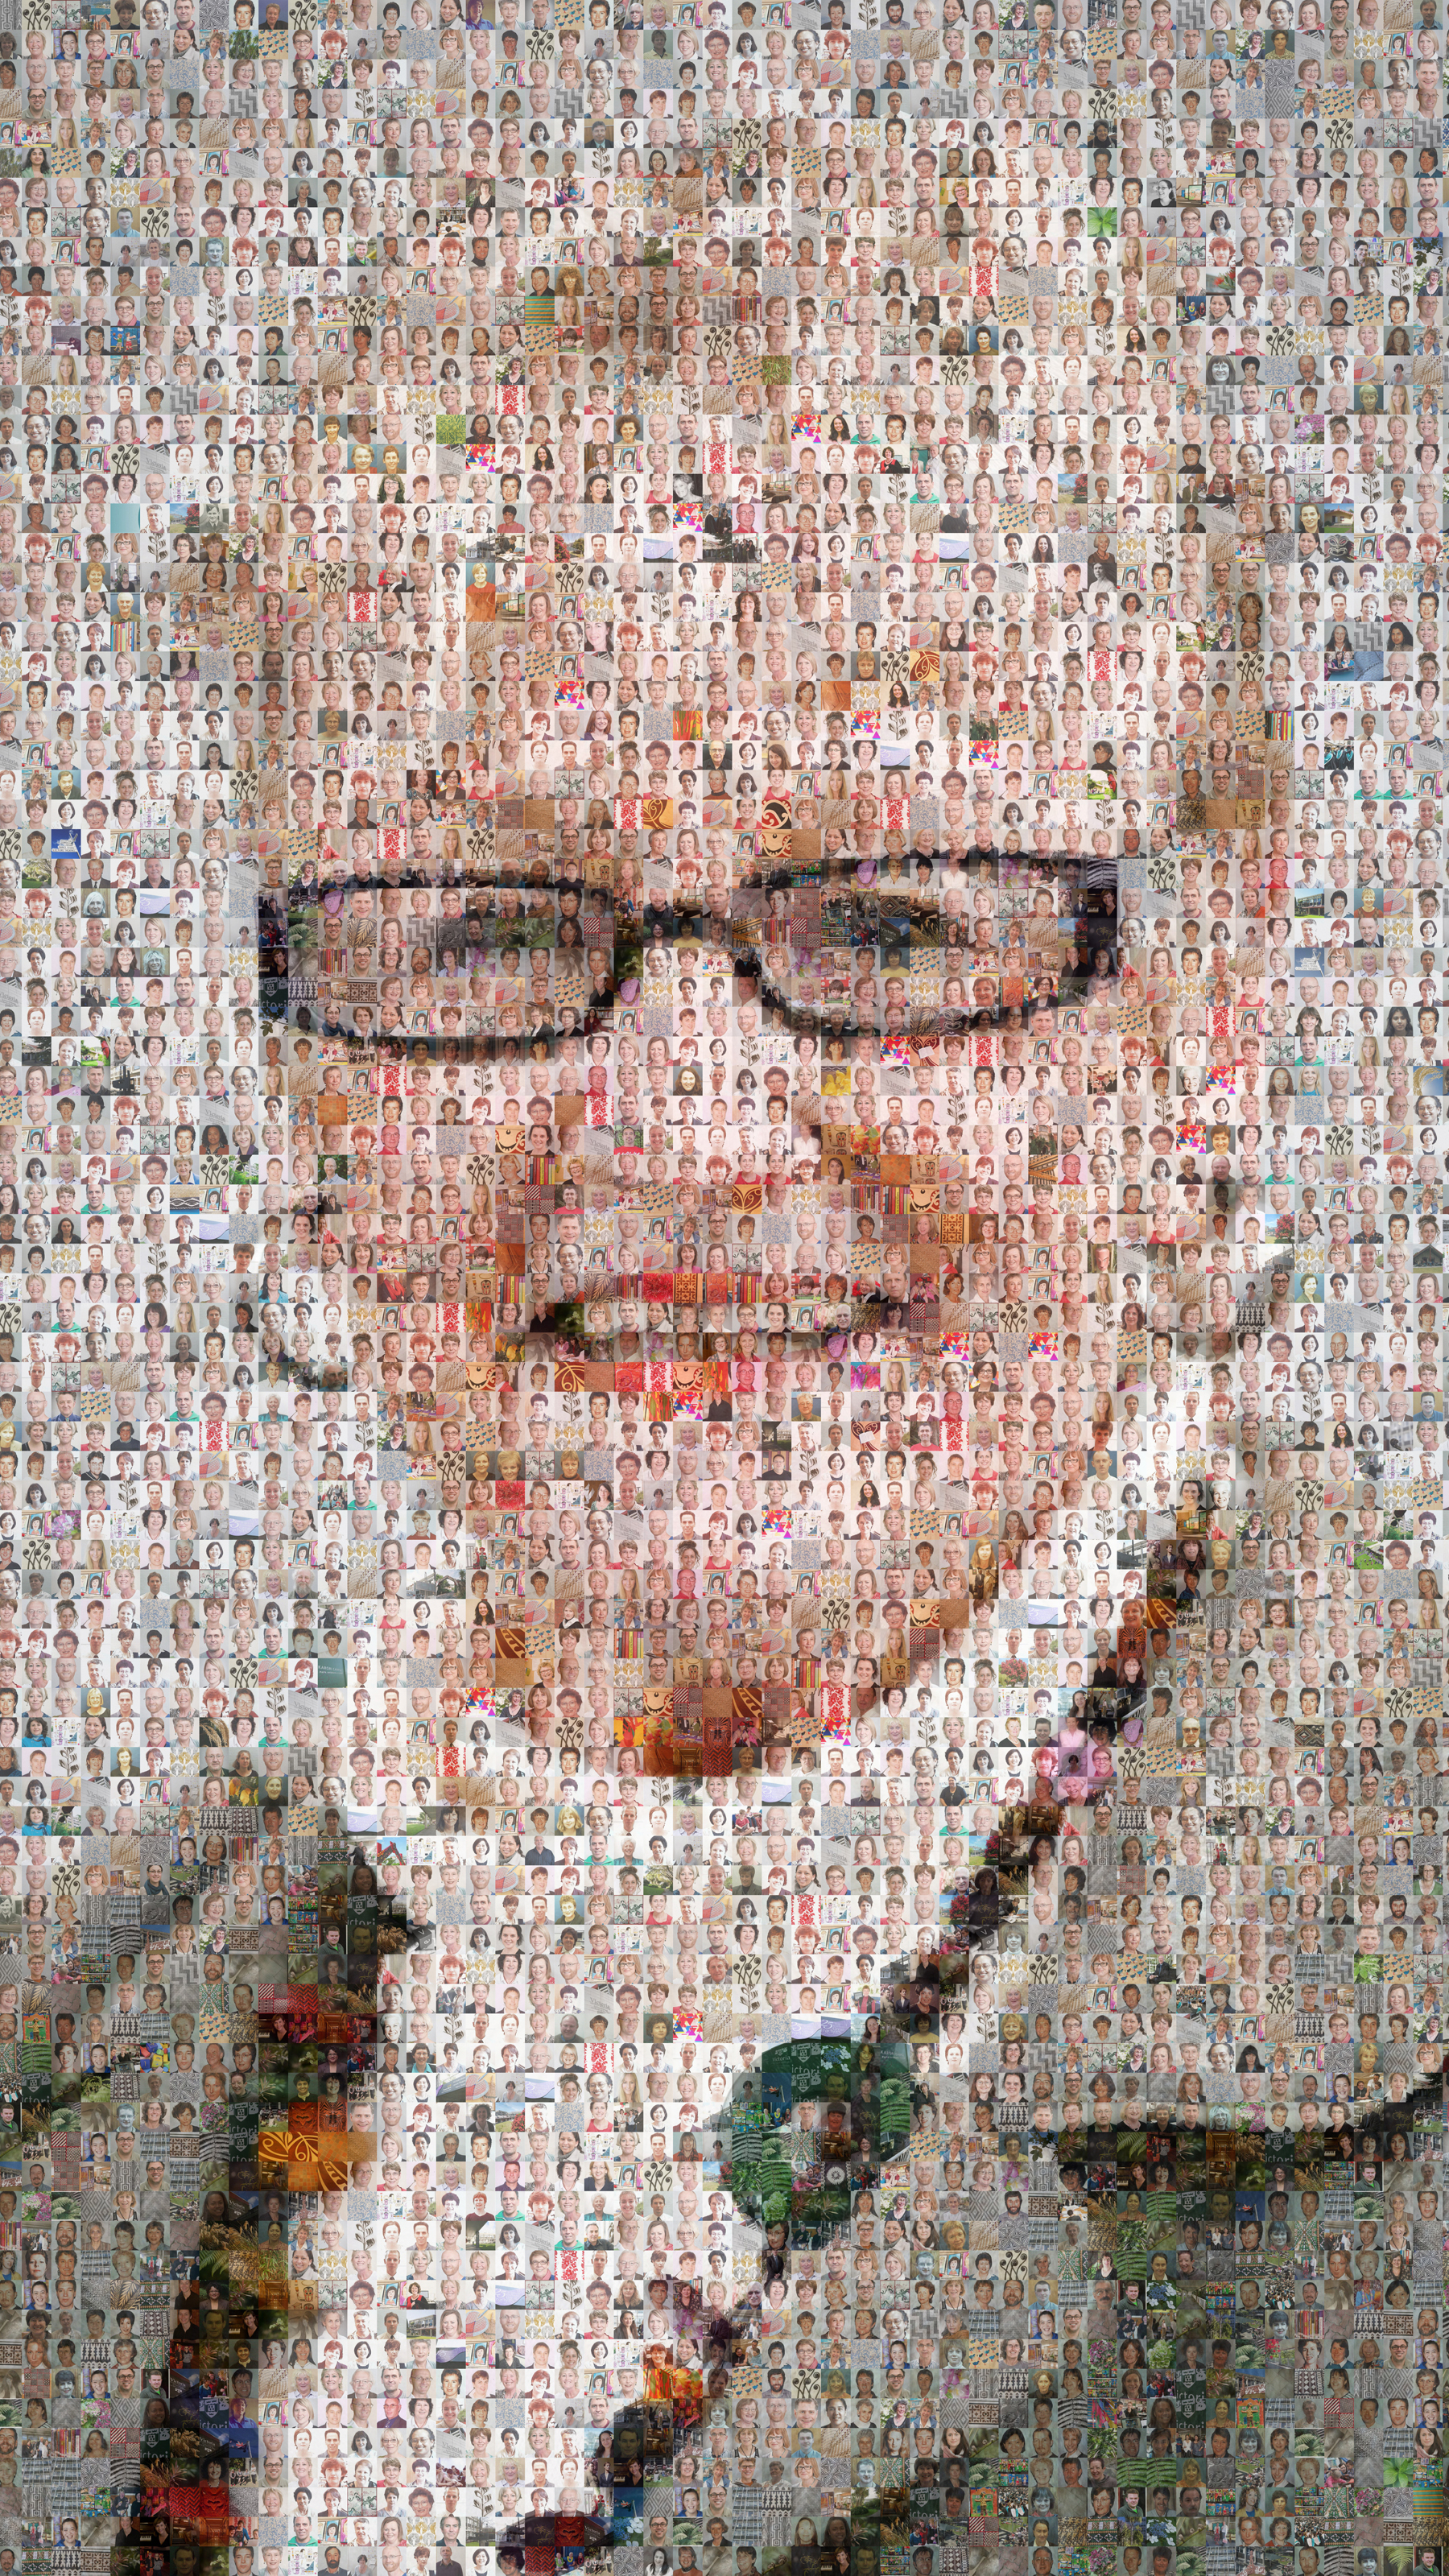 Portrait of Liz made from the pictures of her colleagues.